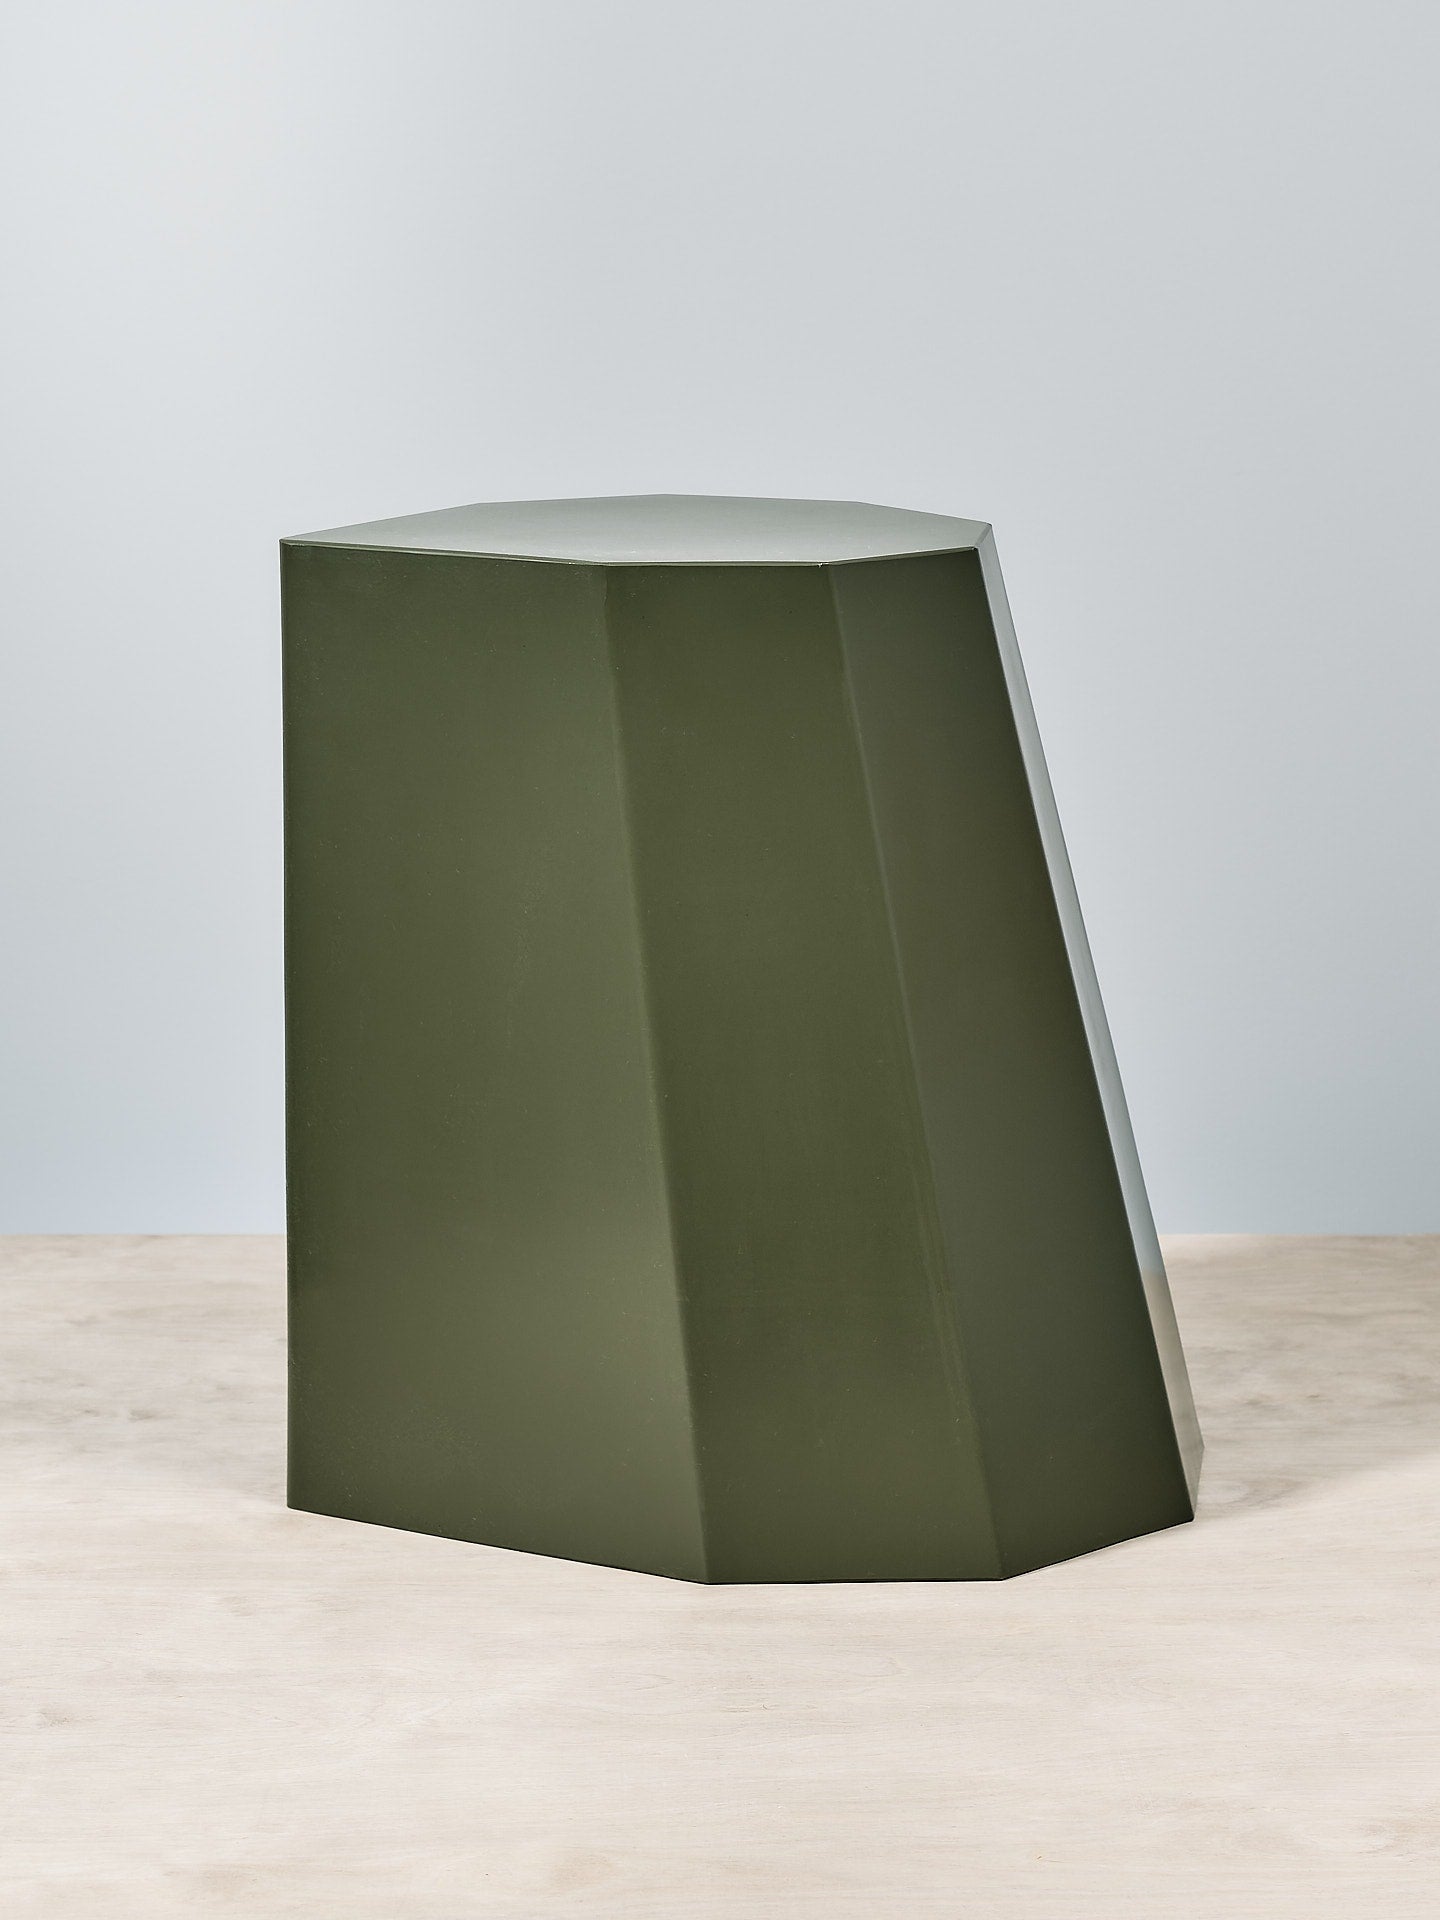 An Arnold Circus Stool - Khaki by Martino Gamper on a white surface.